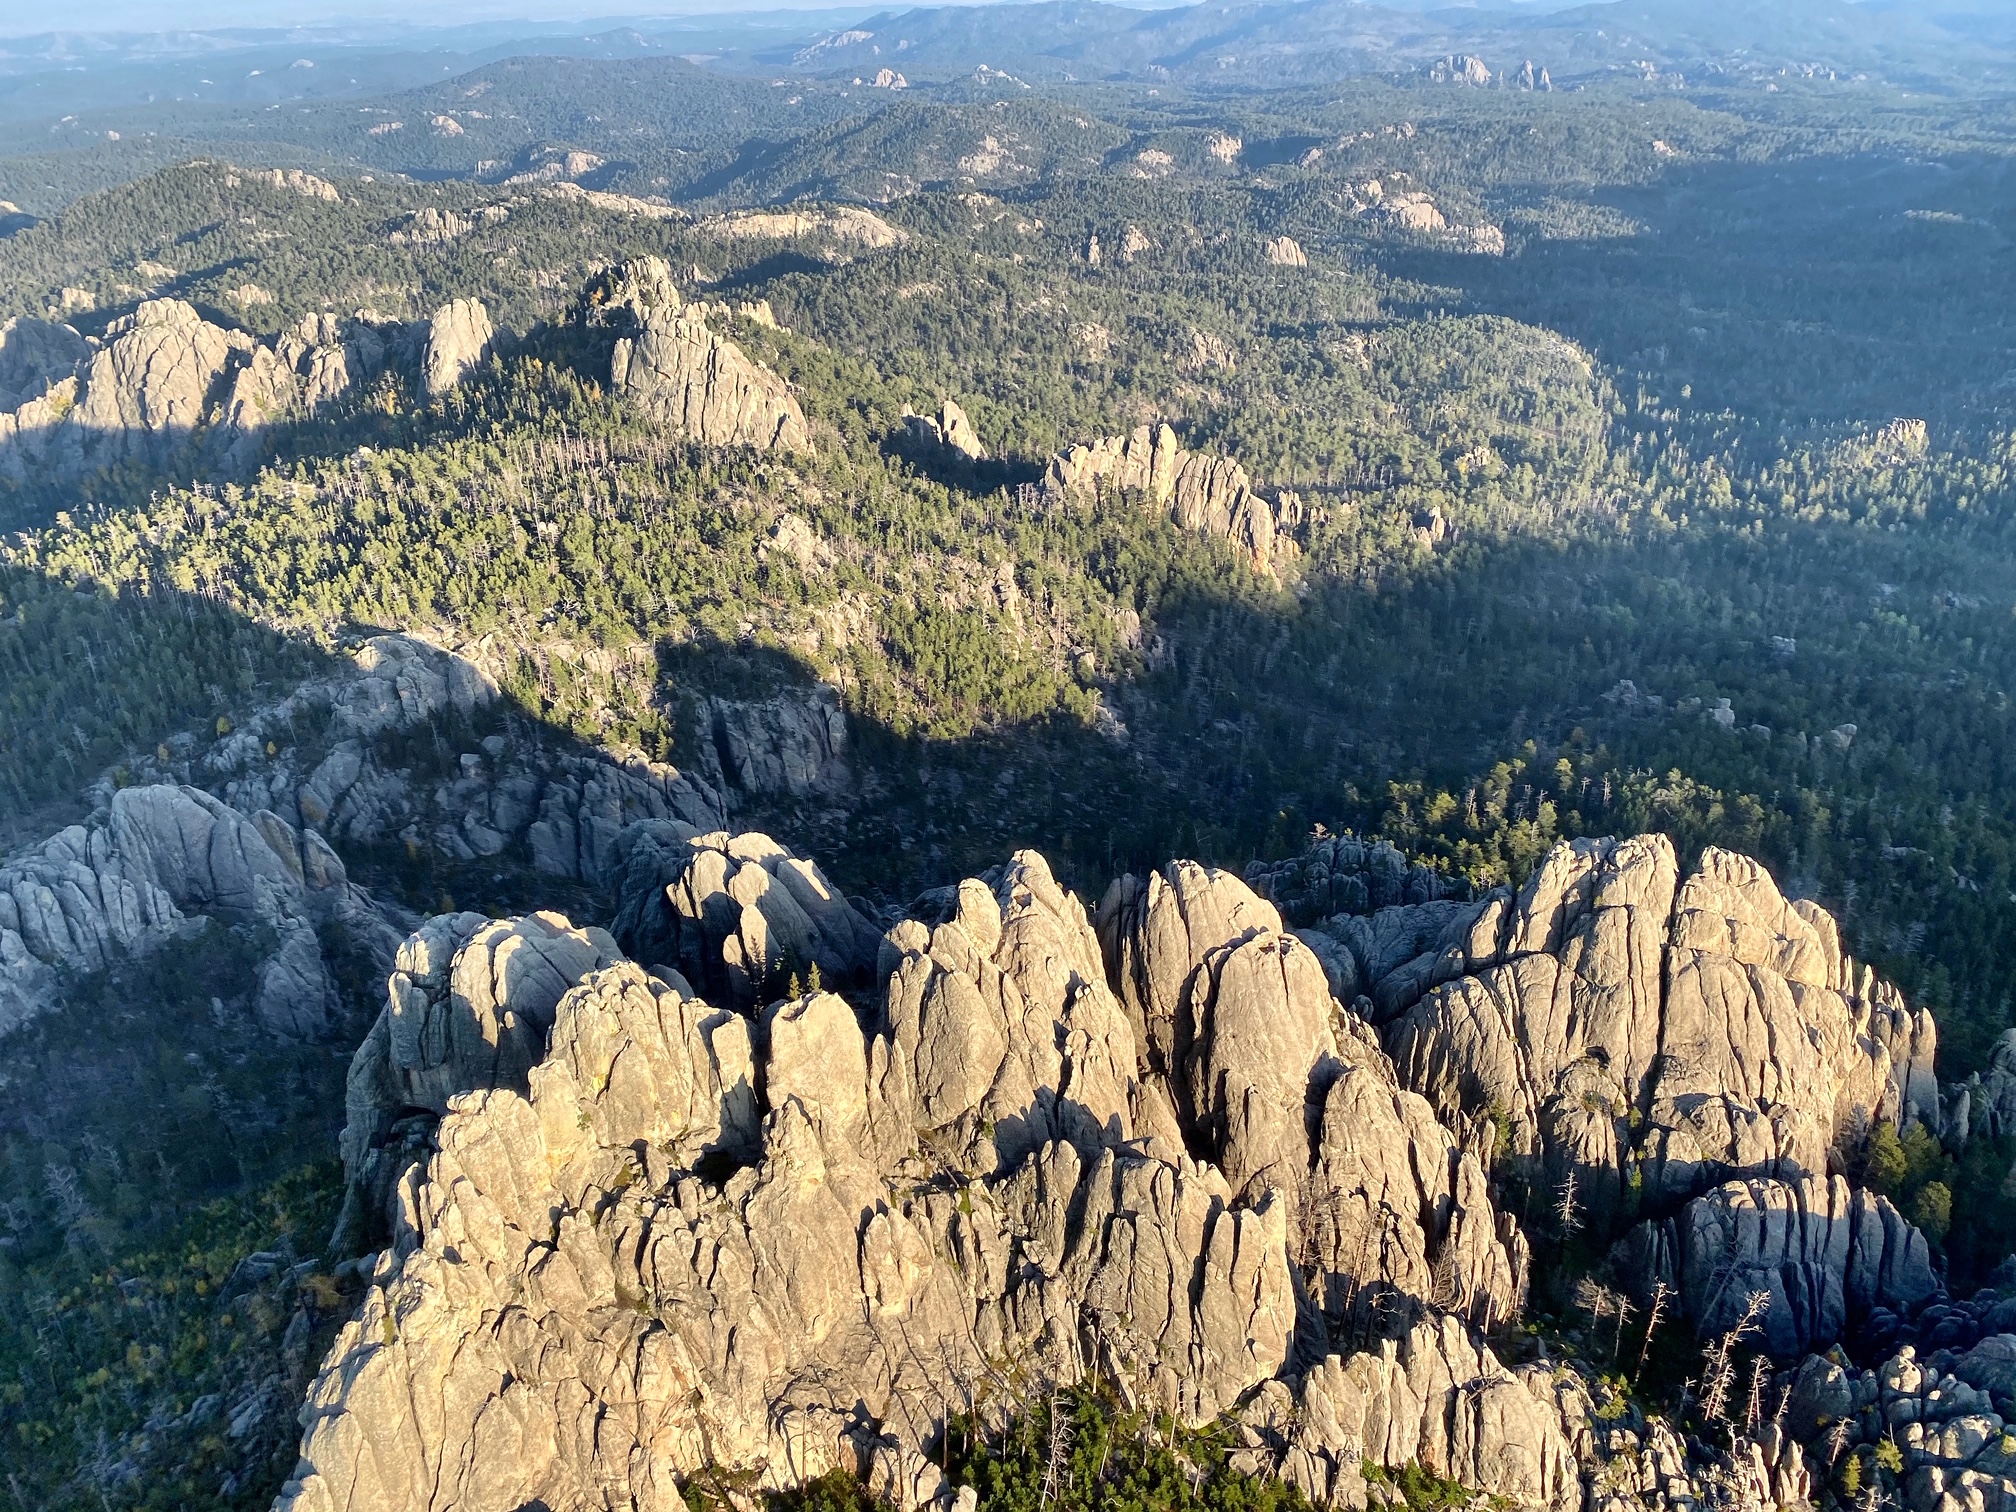 48 HOURS IN THE BLACK HILLS